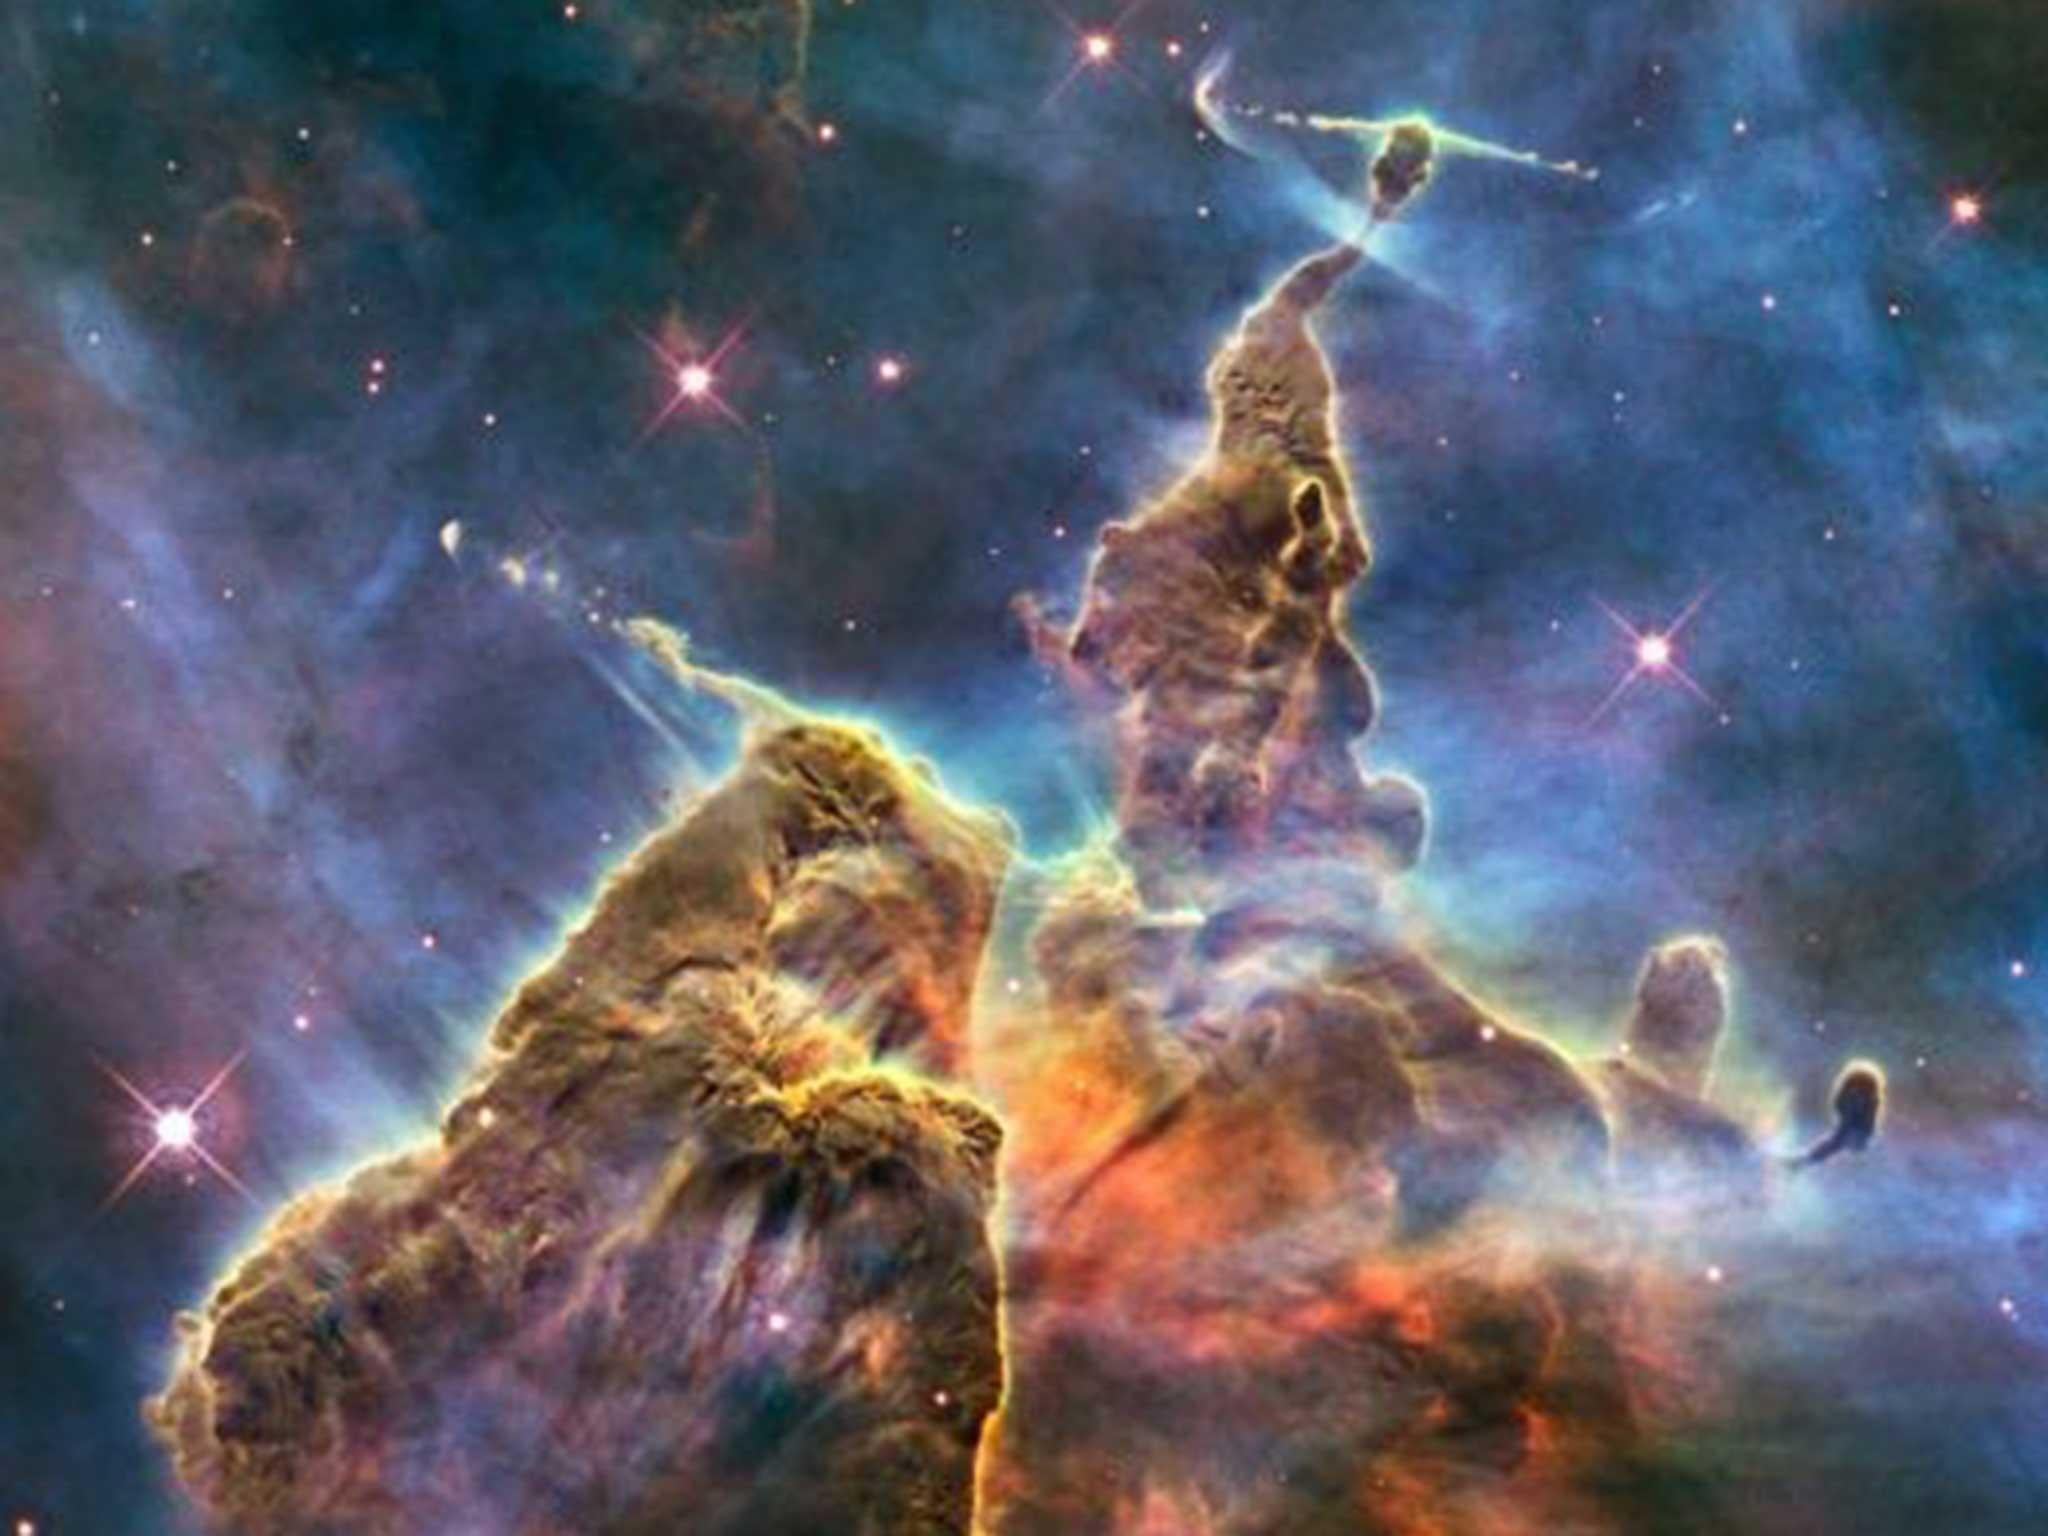 A Hubble image of a pillar of gas and dust that is being eaten away by the light from nearby stars in the Carina nebula, located 7,500 light years away